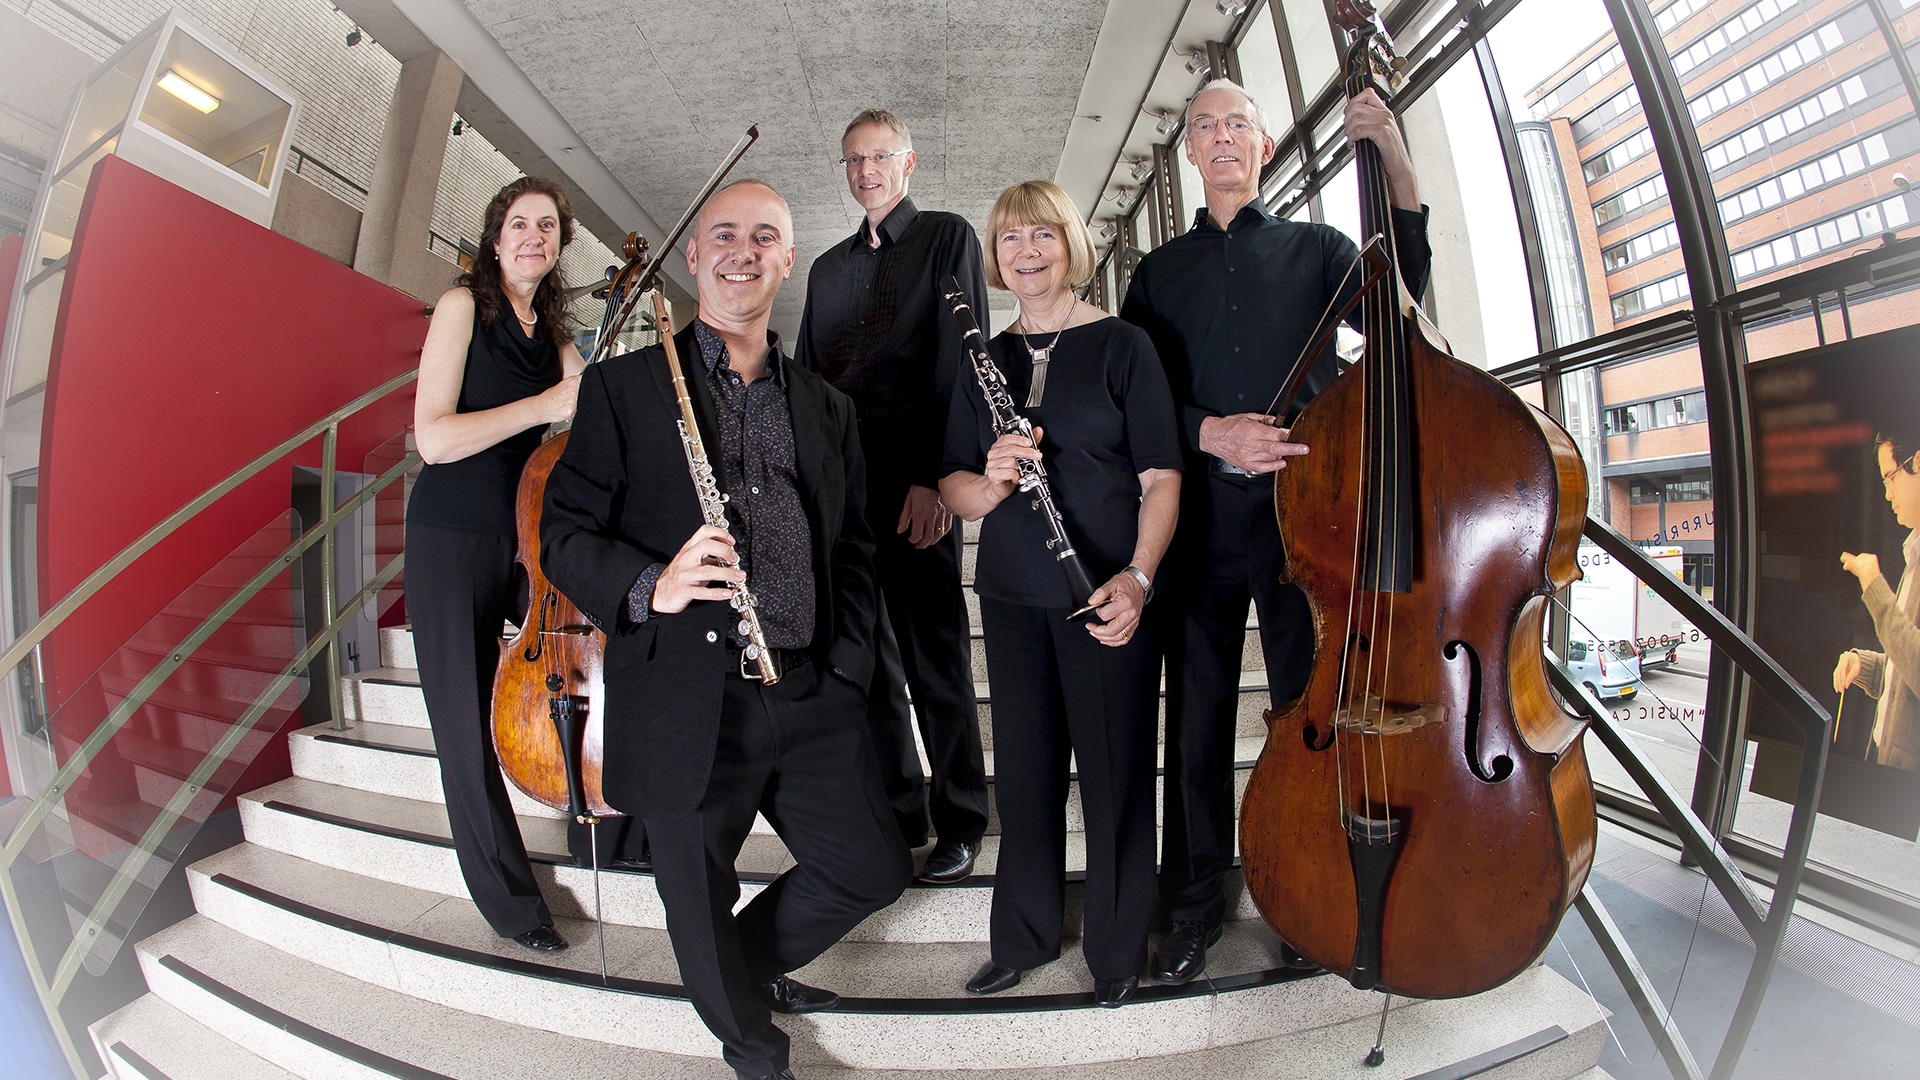 The Pleyel Ensemble, a group of 5 people dressed in smart black clothes, holding wind and string instruments.